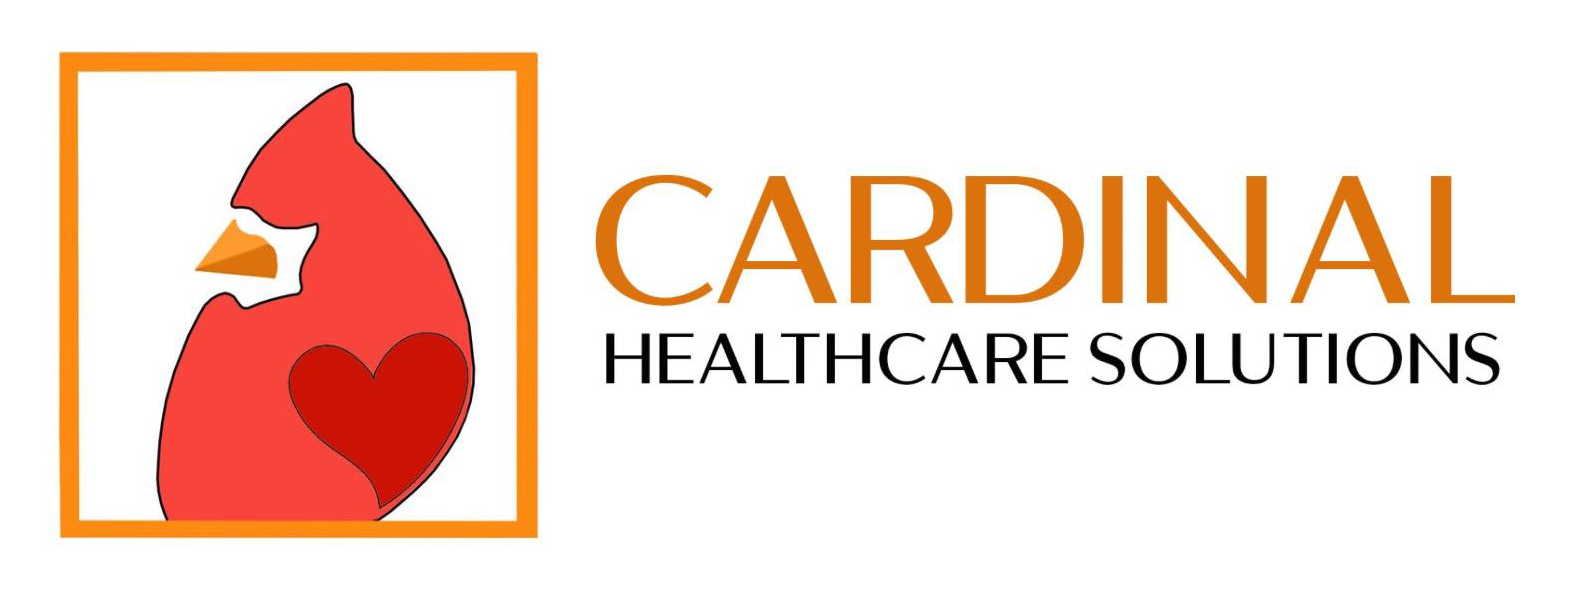 Cardinal Healthcare Solutions